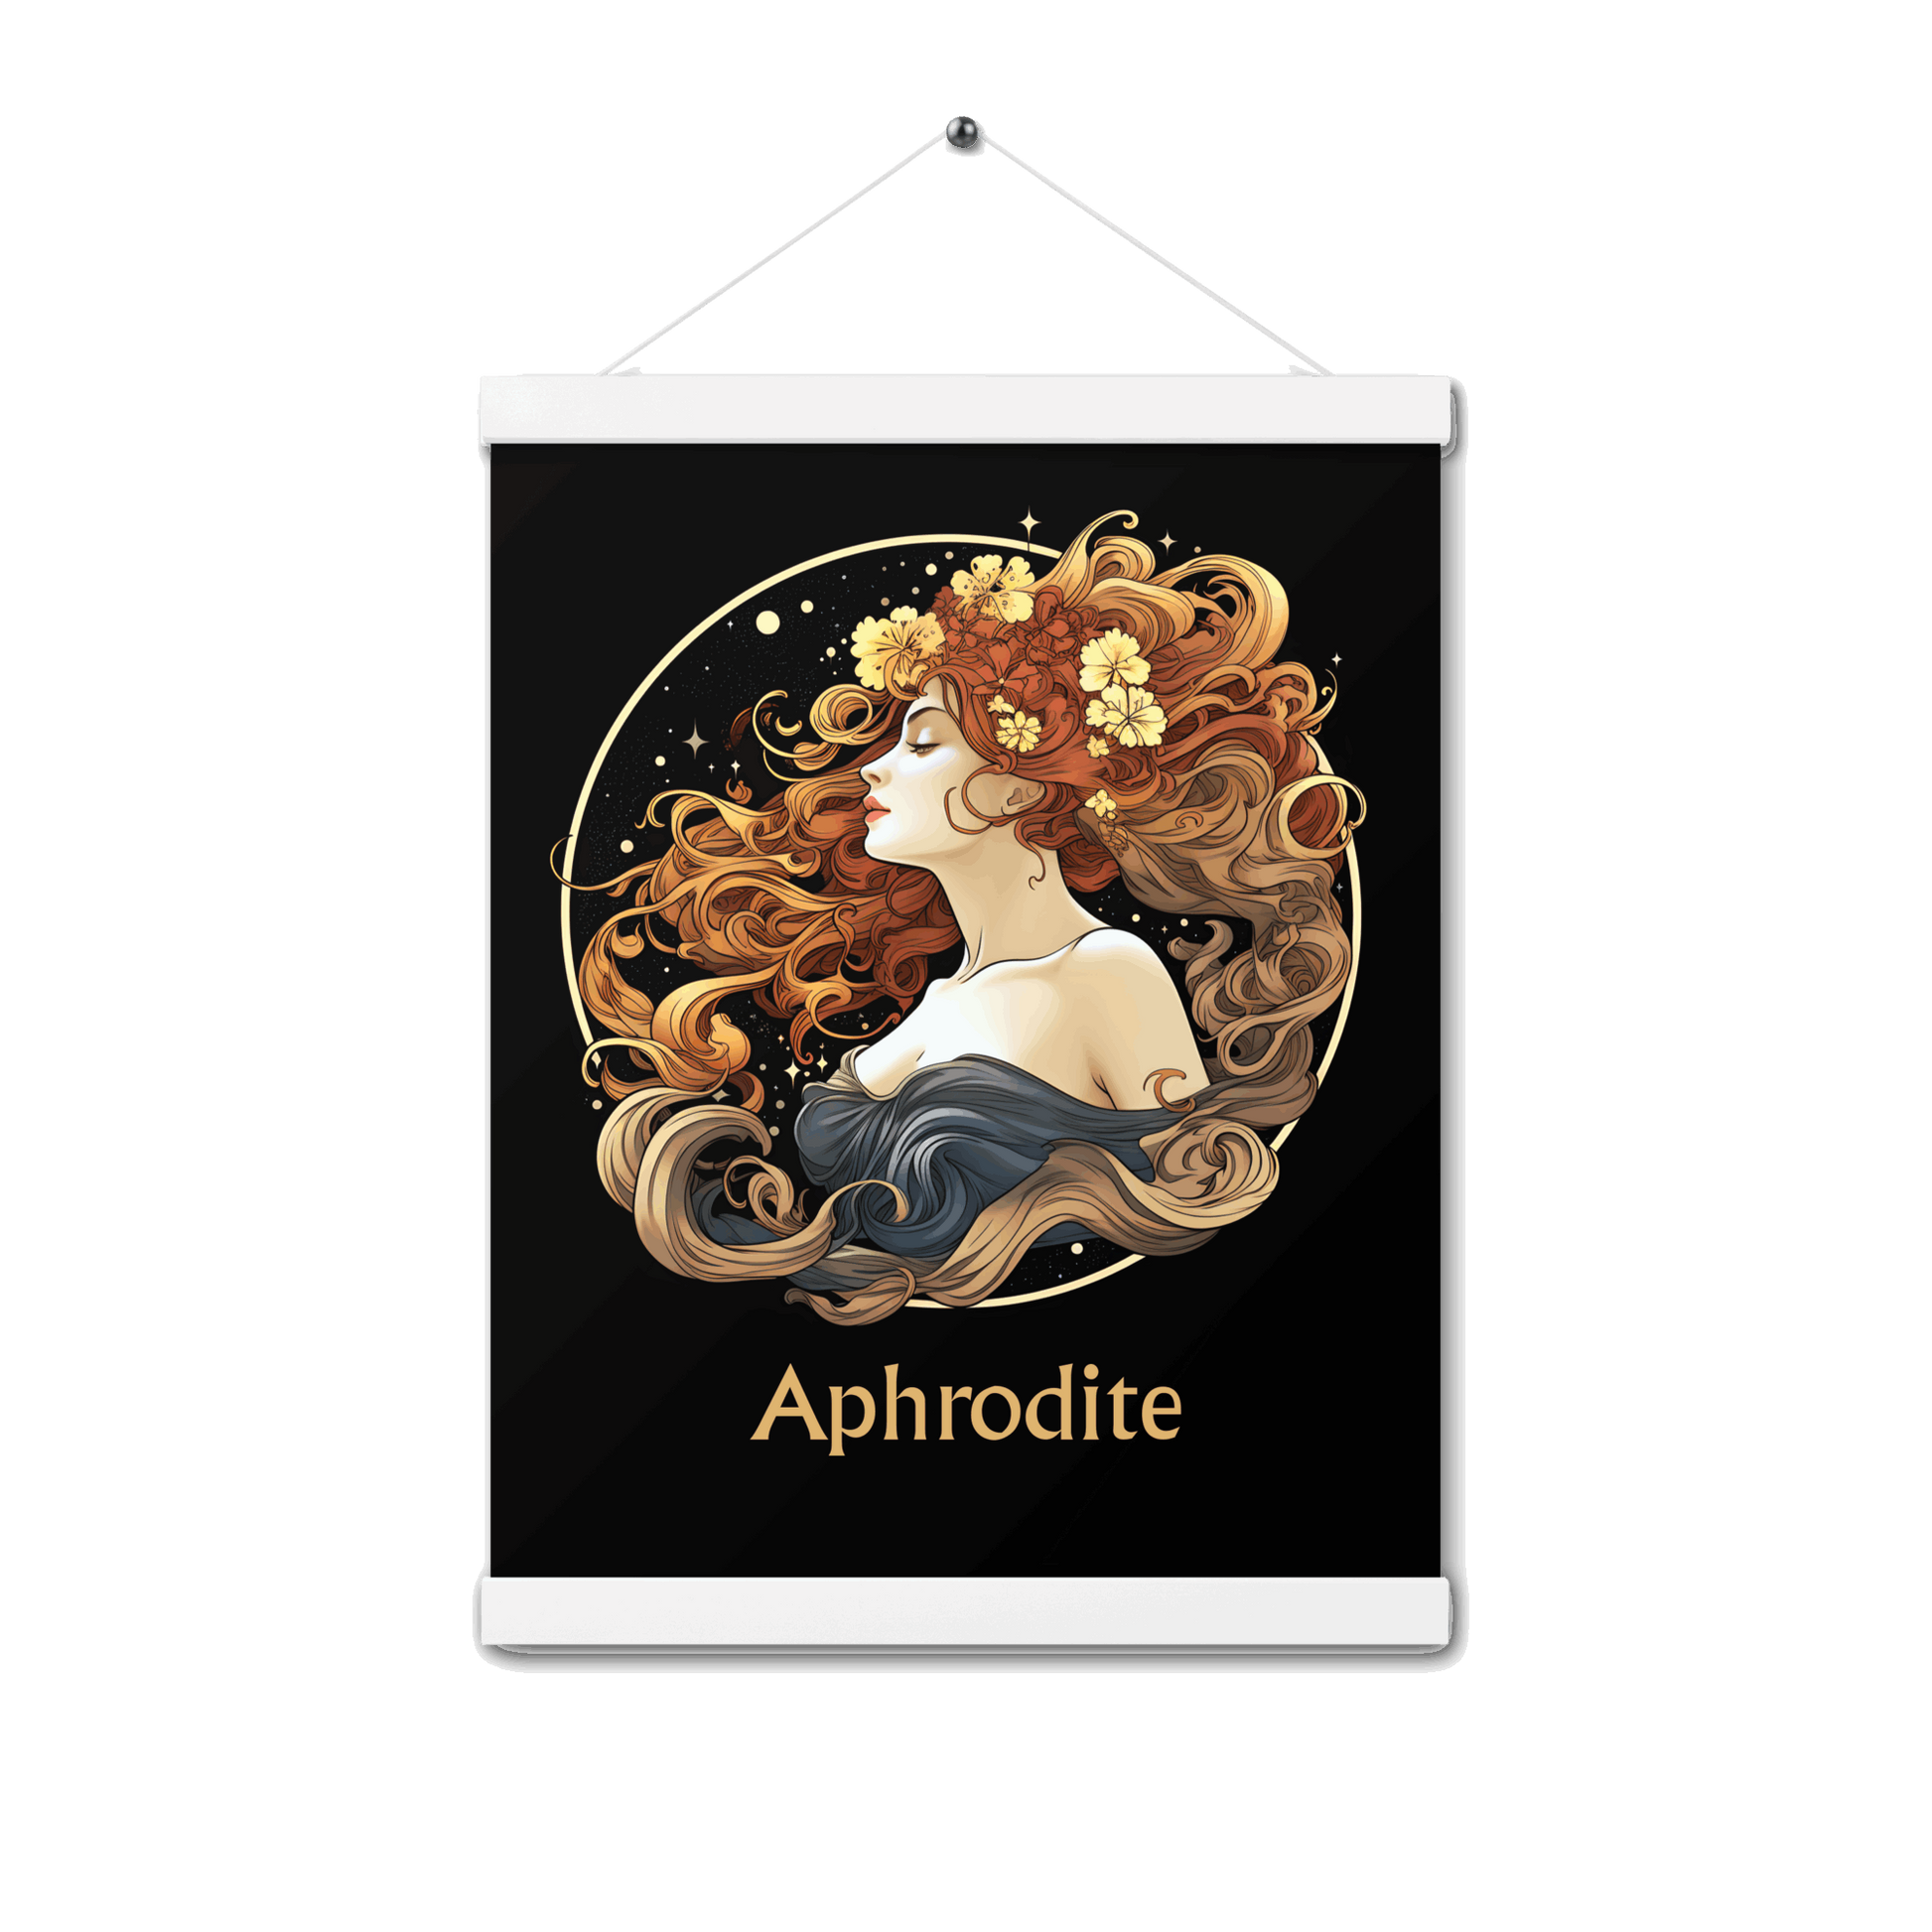 Aphrodite's Radiance - Colorful Hanging Wall Art High Quality Matte Poster DrawDadDraw